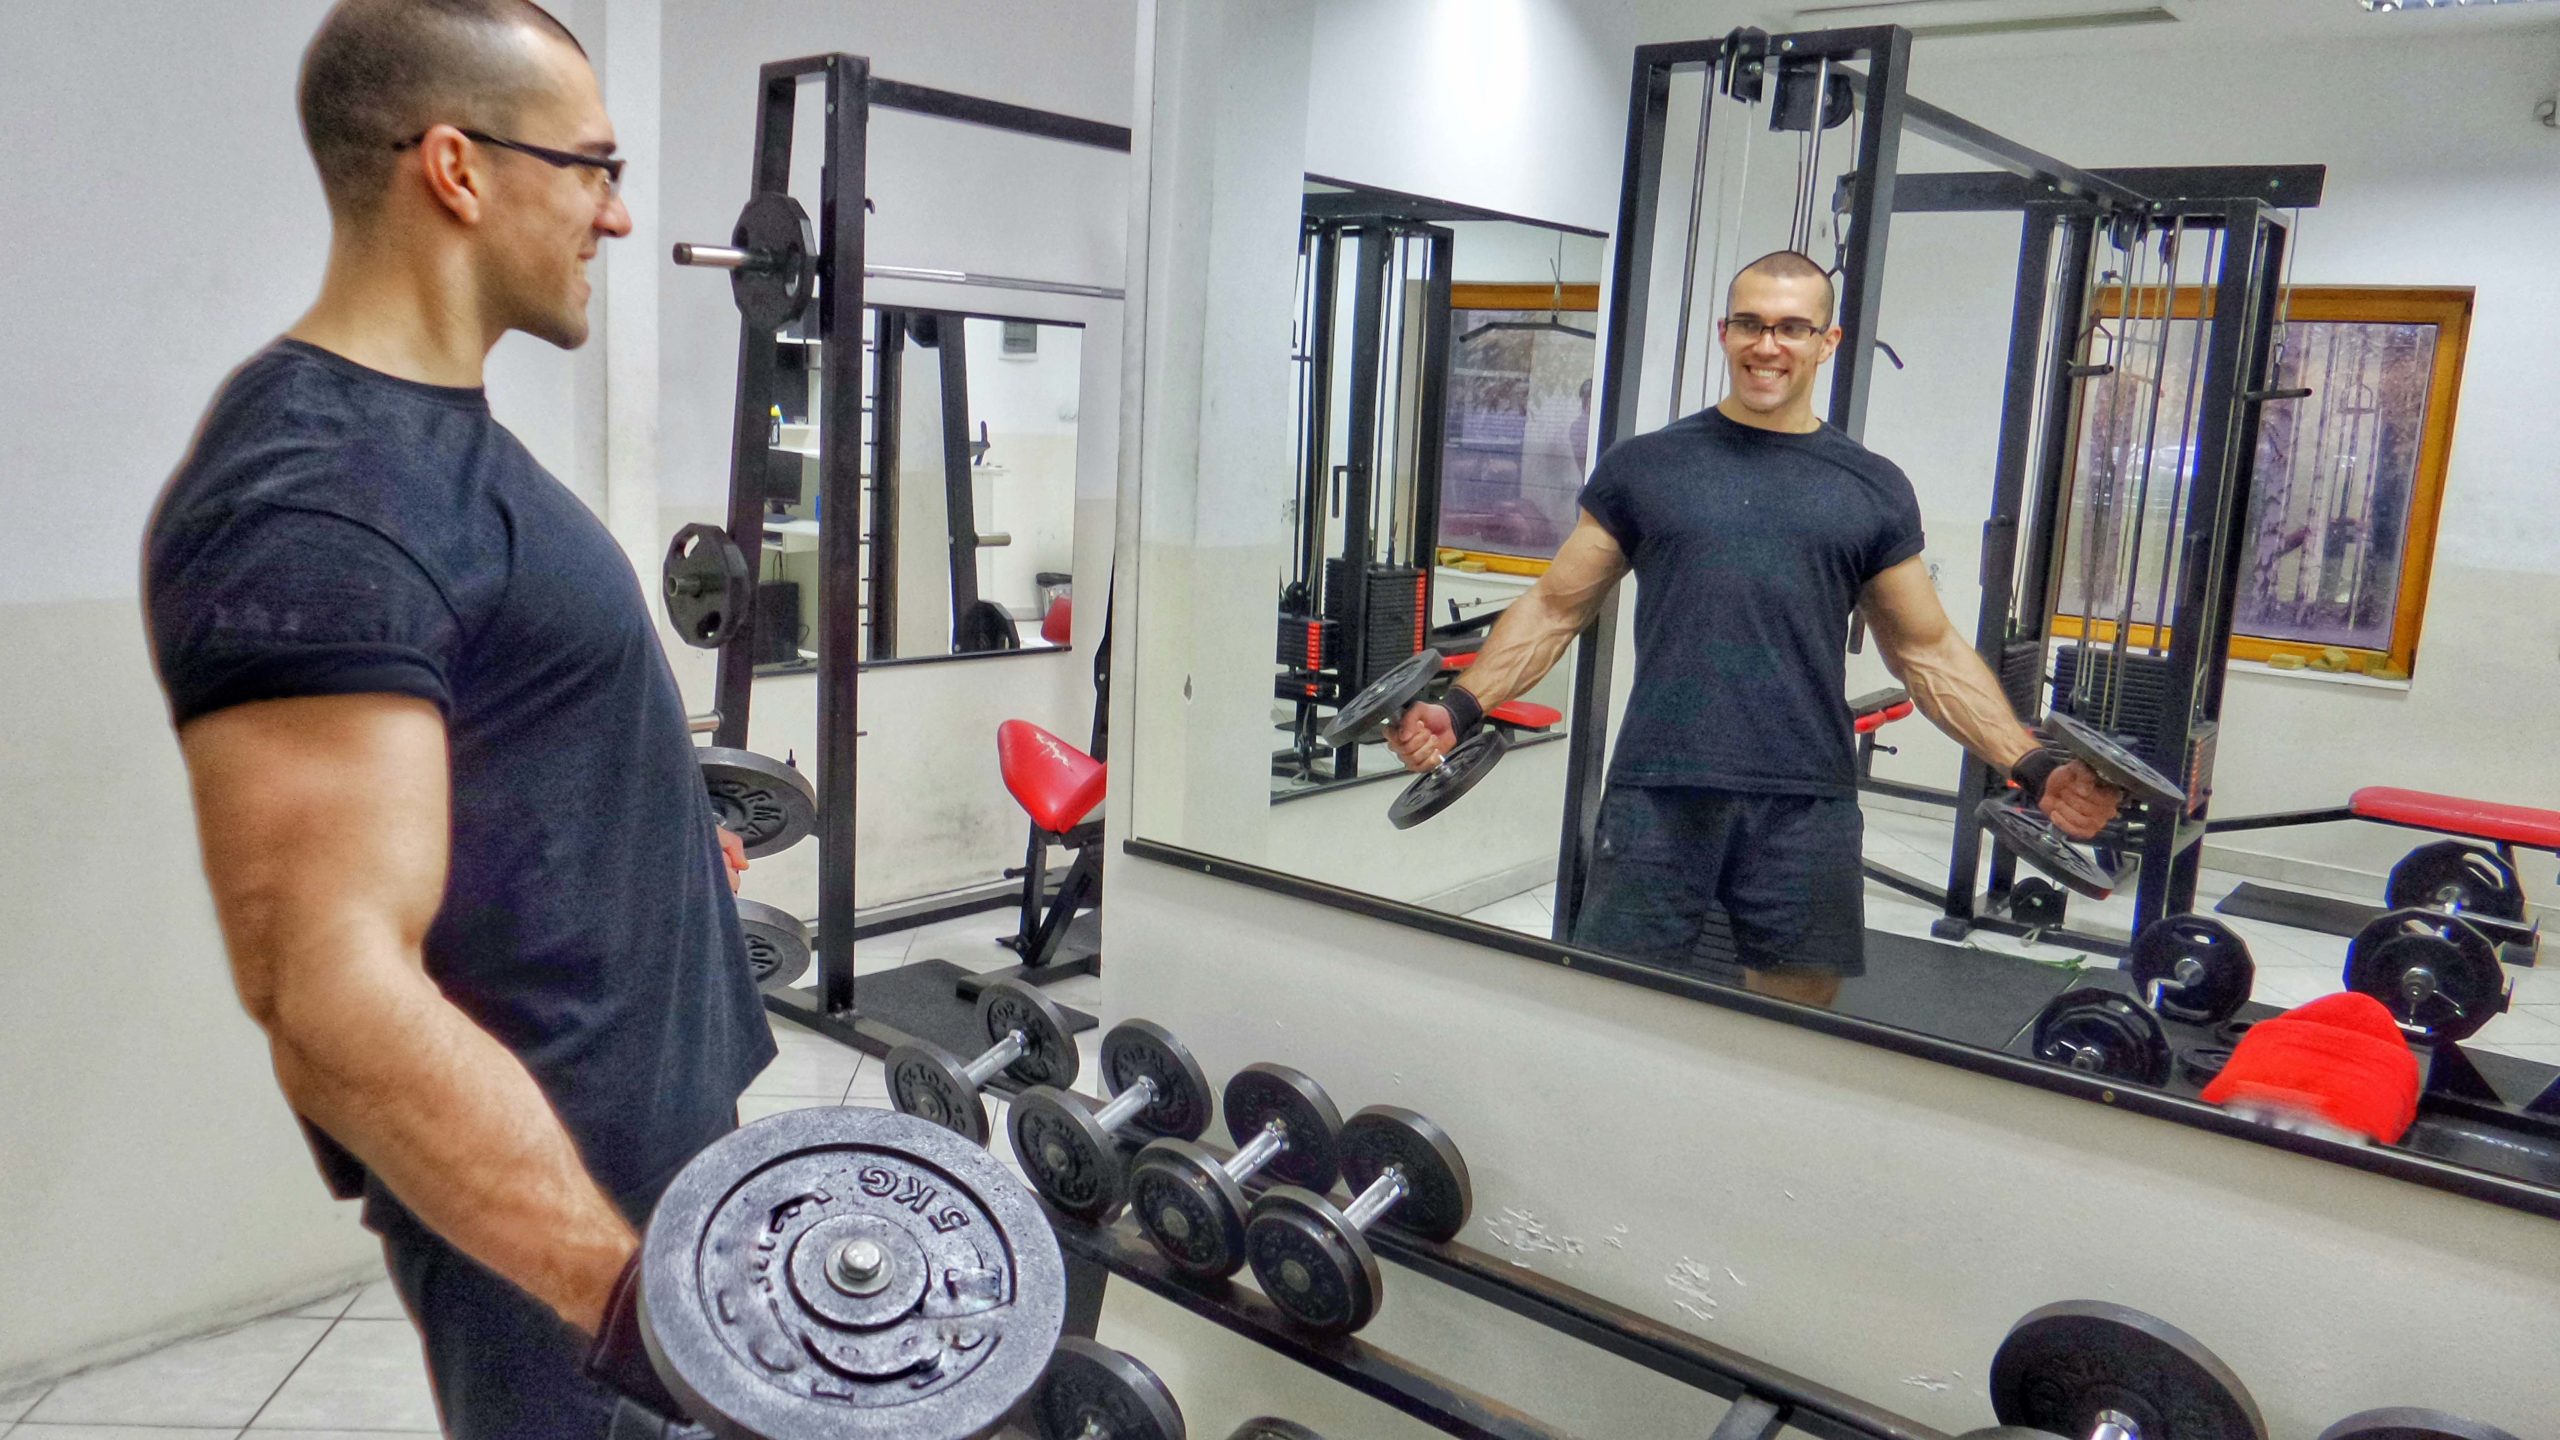 Wall Mirrors For Your Home Gym, Garage Gym Mirror Ideas